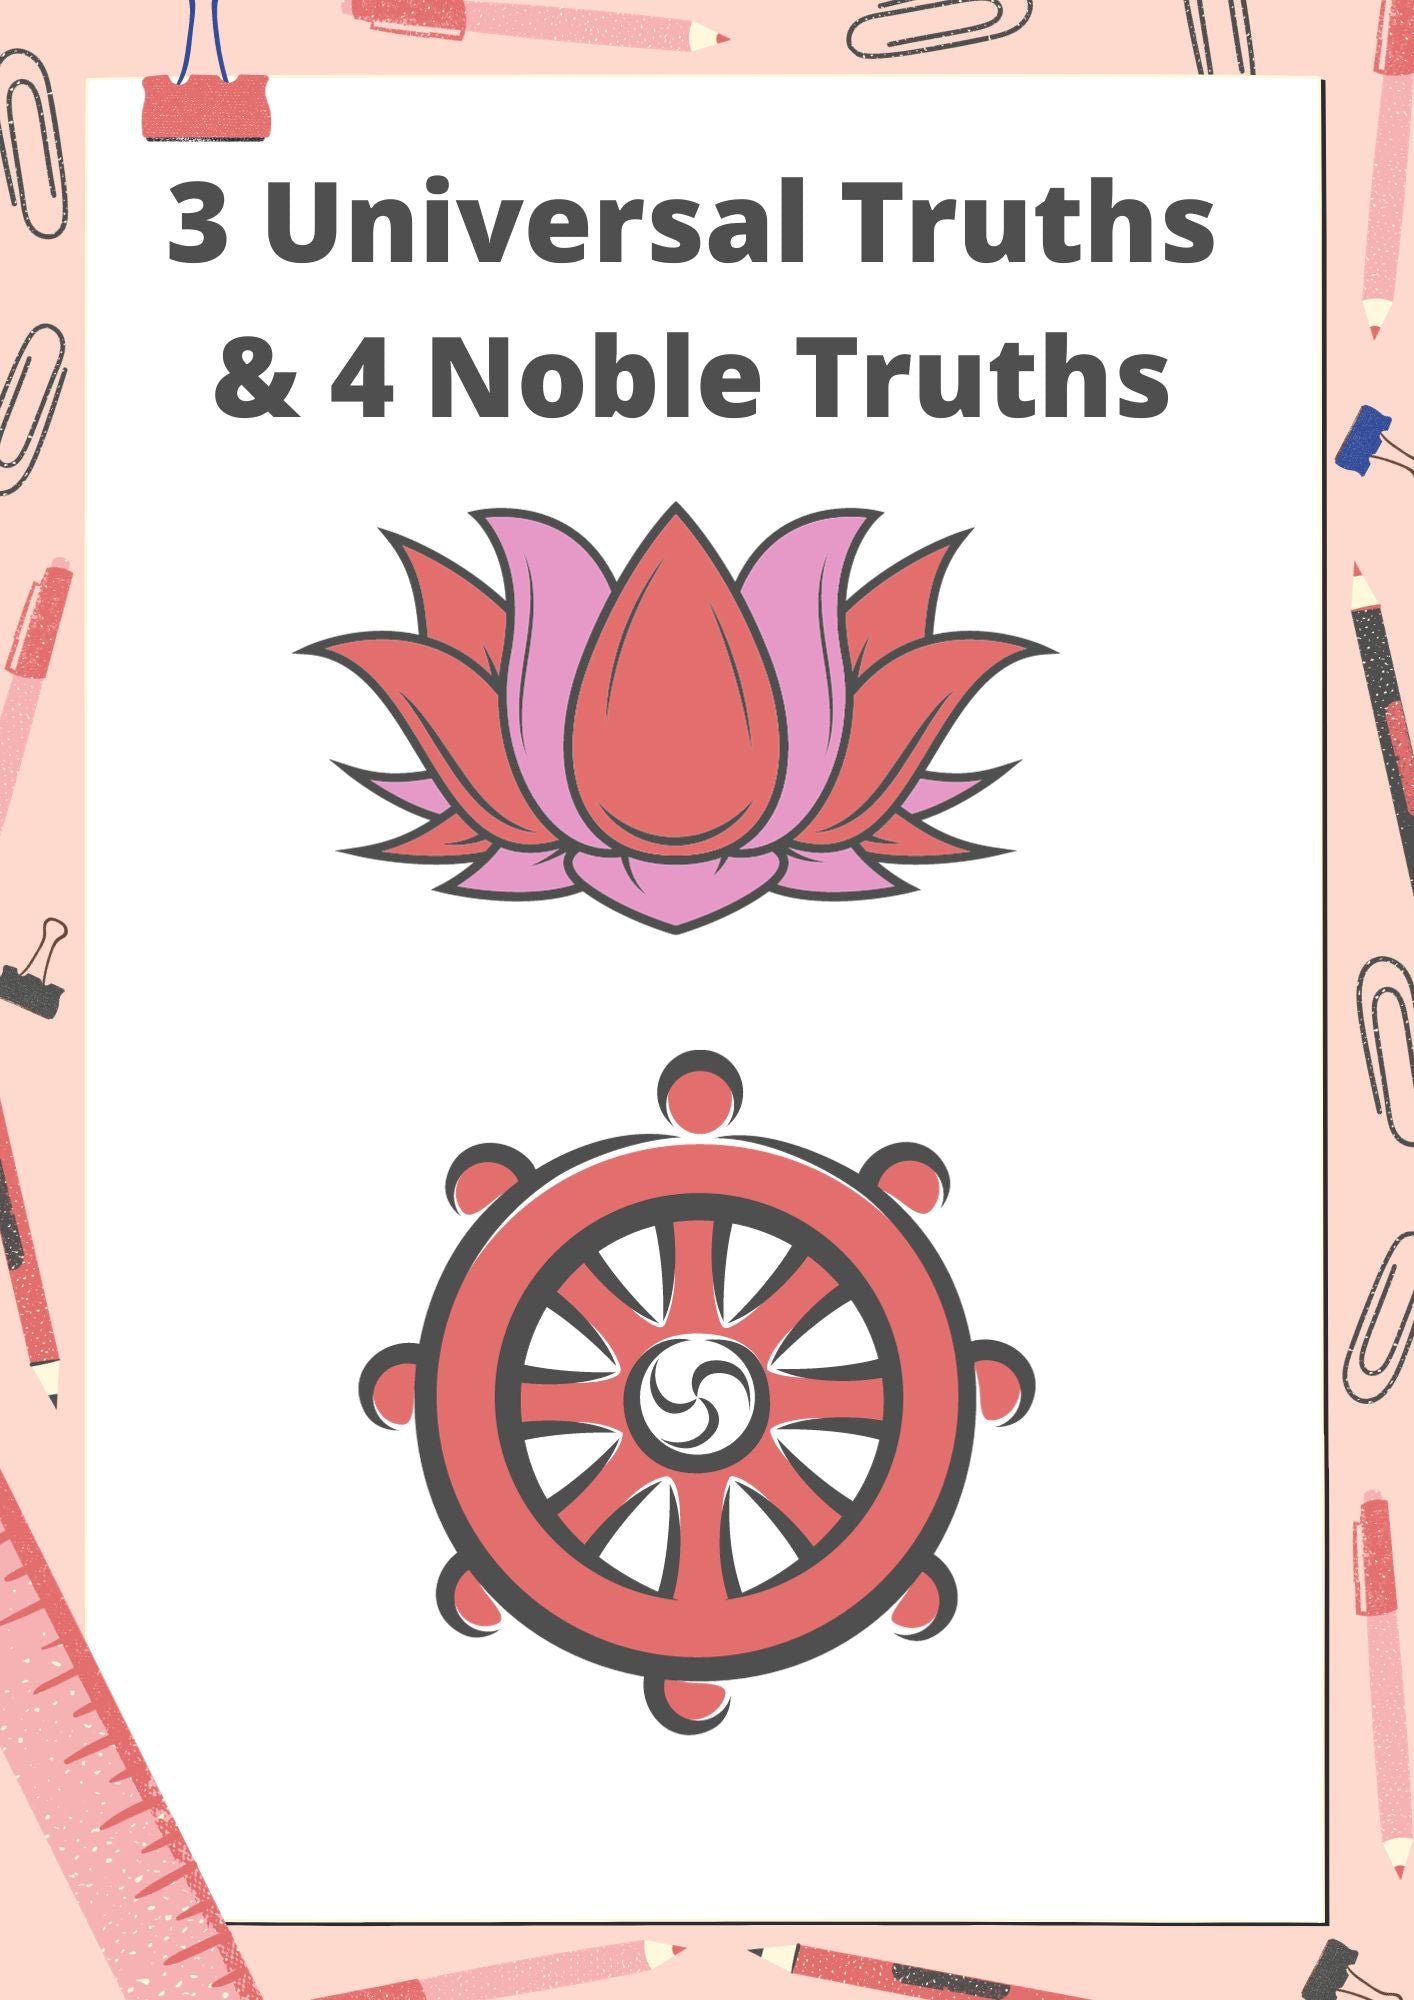 3 Universal Truths & 4 Noble Truths